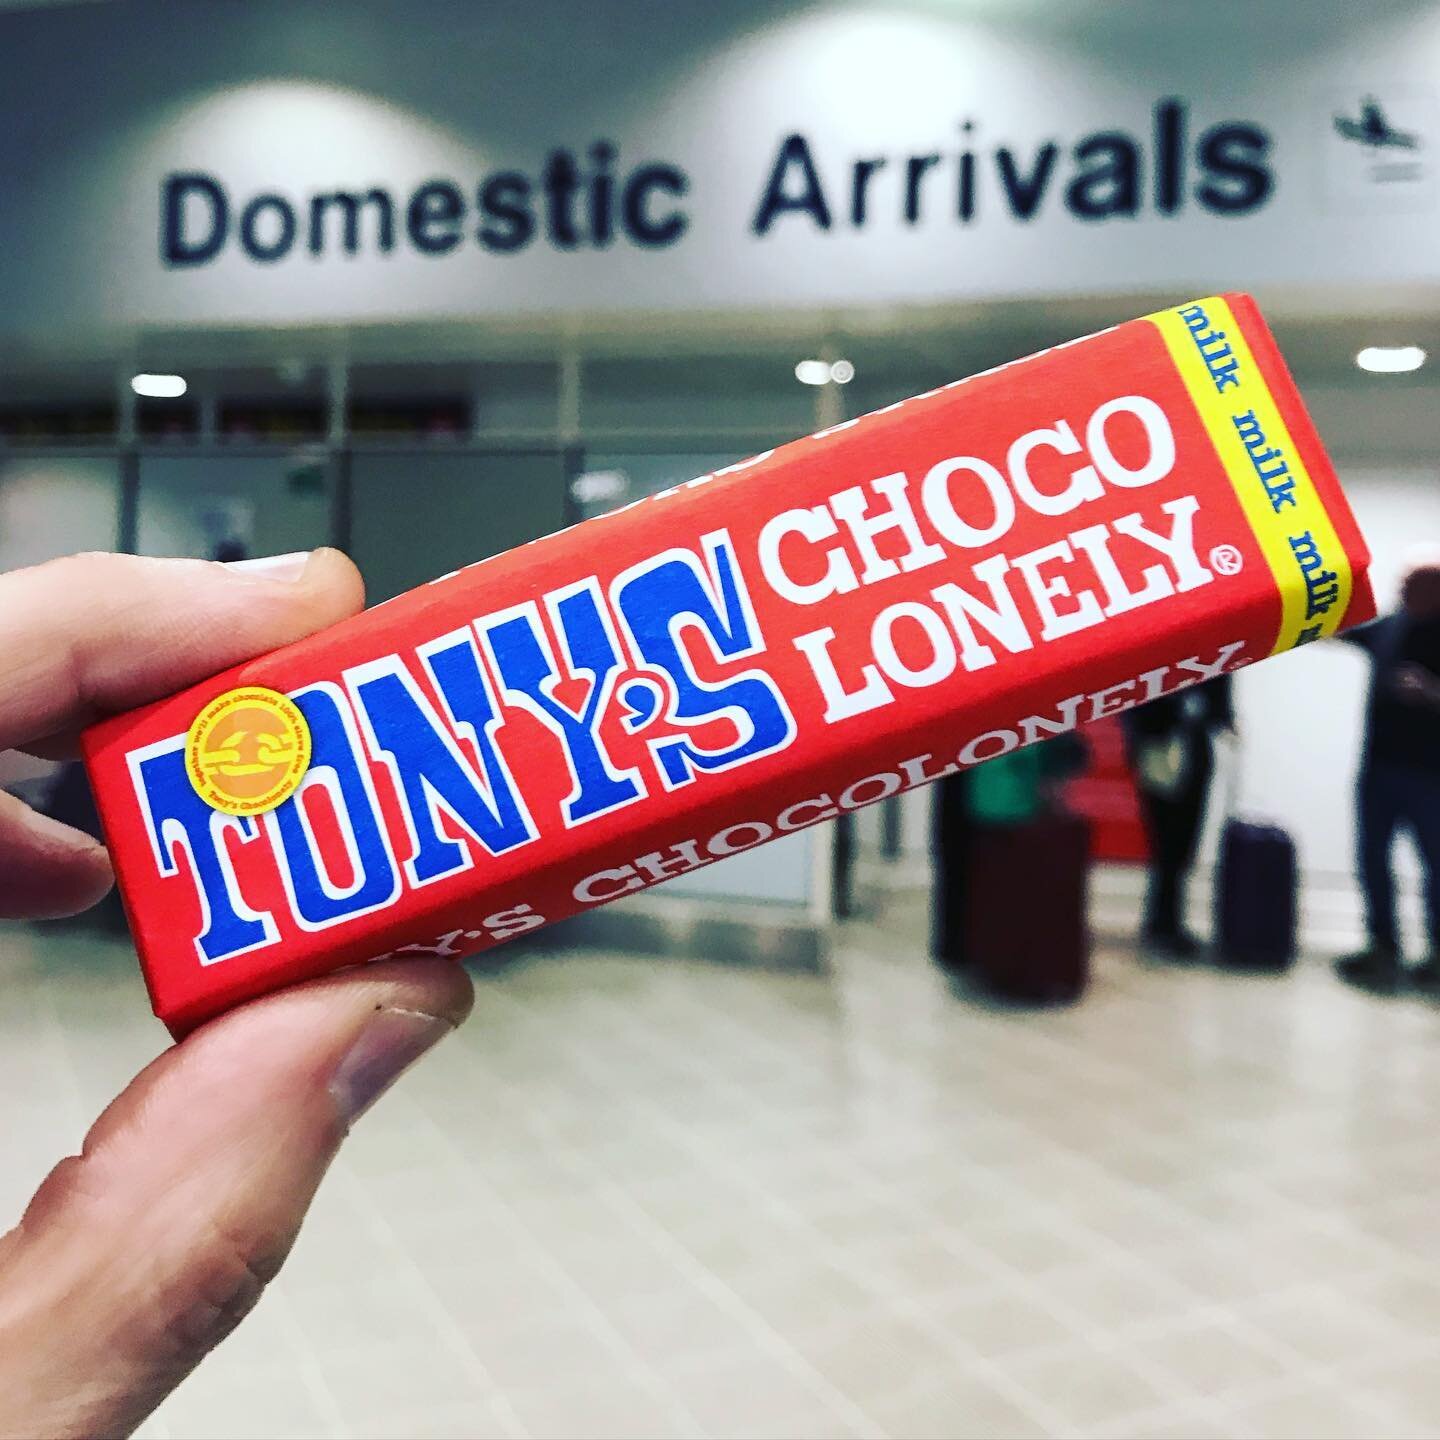 Picking up the wife from his week long jolly in Limoges 🇫🇷 ❤️ #lonelyboy 

(They only sell @tonyschocolonely in the airport because they know it&rsquo;s full of #loveactually romantic gays 😂) #cynical #marketing #ploy #fatty